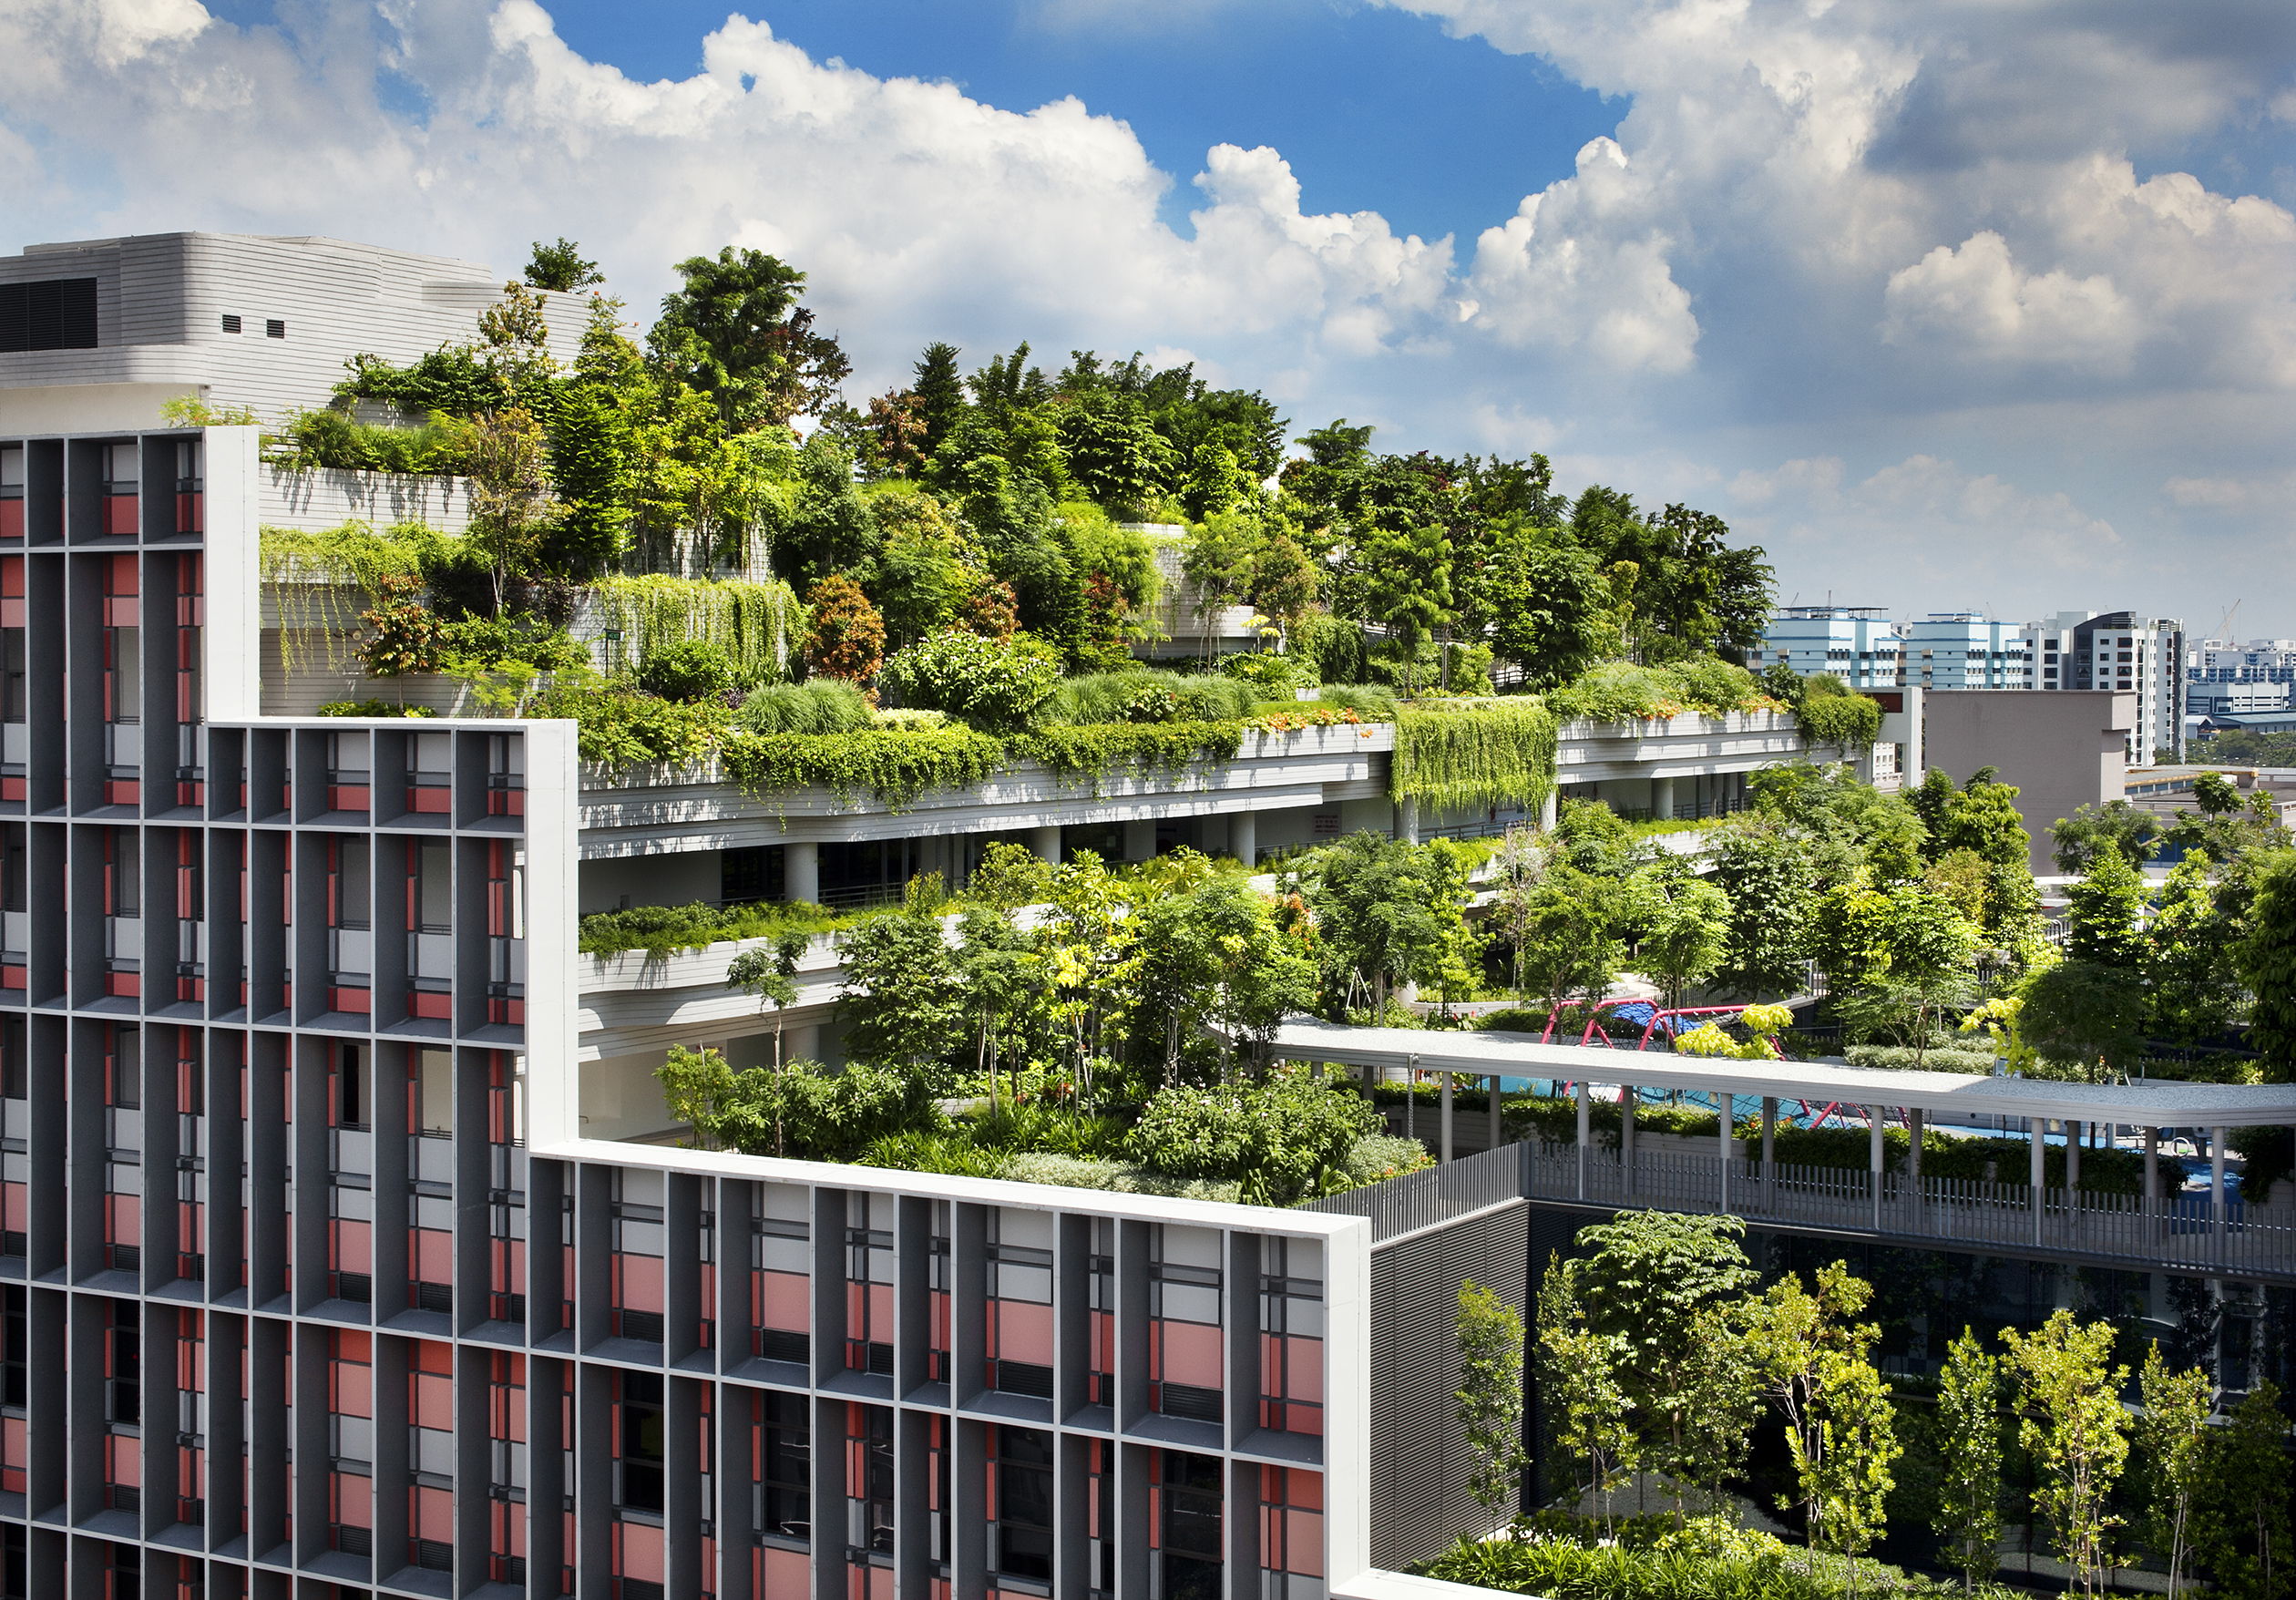 Kampung Admiralty designed by Ramboll Studio Dreiseitl (landscape design) and WOHA (architectural lead). Image: Patrick Bingham-Hall